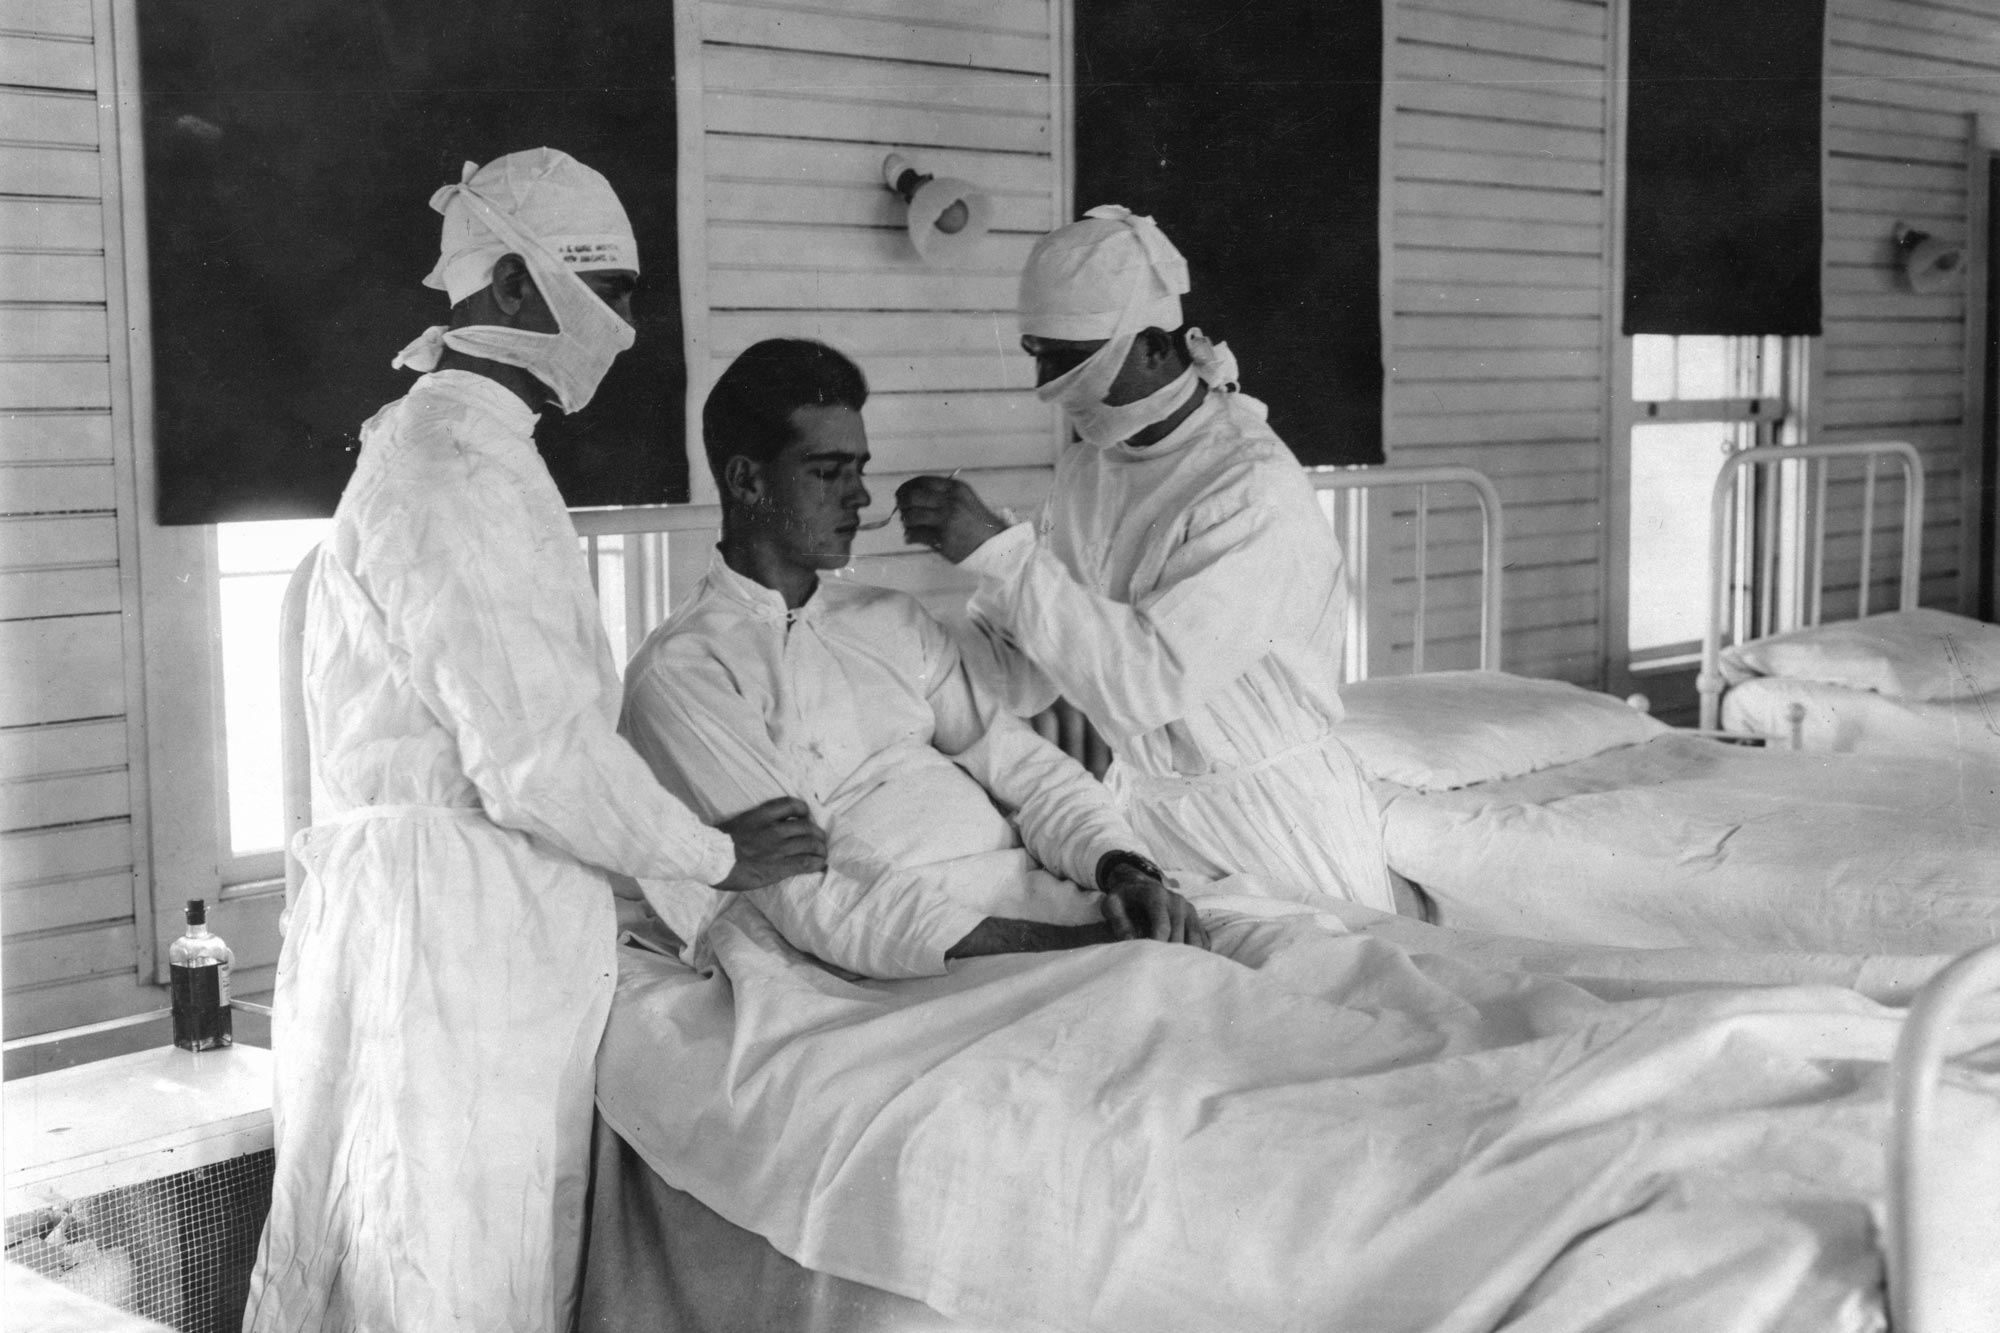 Black and White photo of health care professionals tending to a patient with influenza in a hospital bed